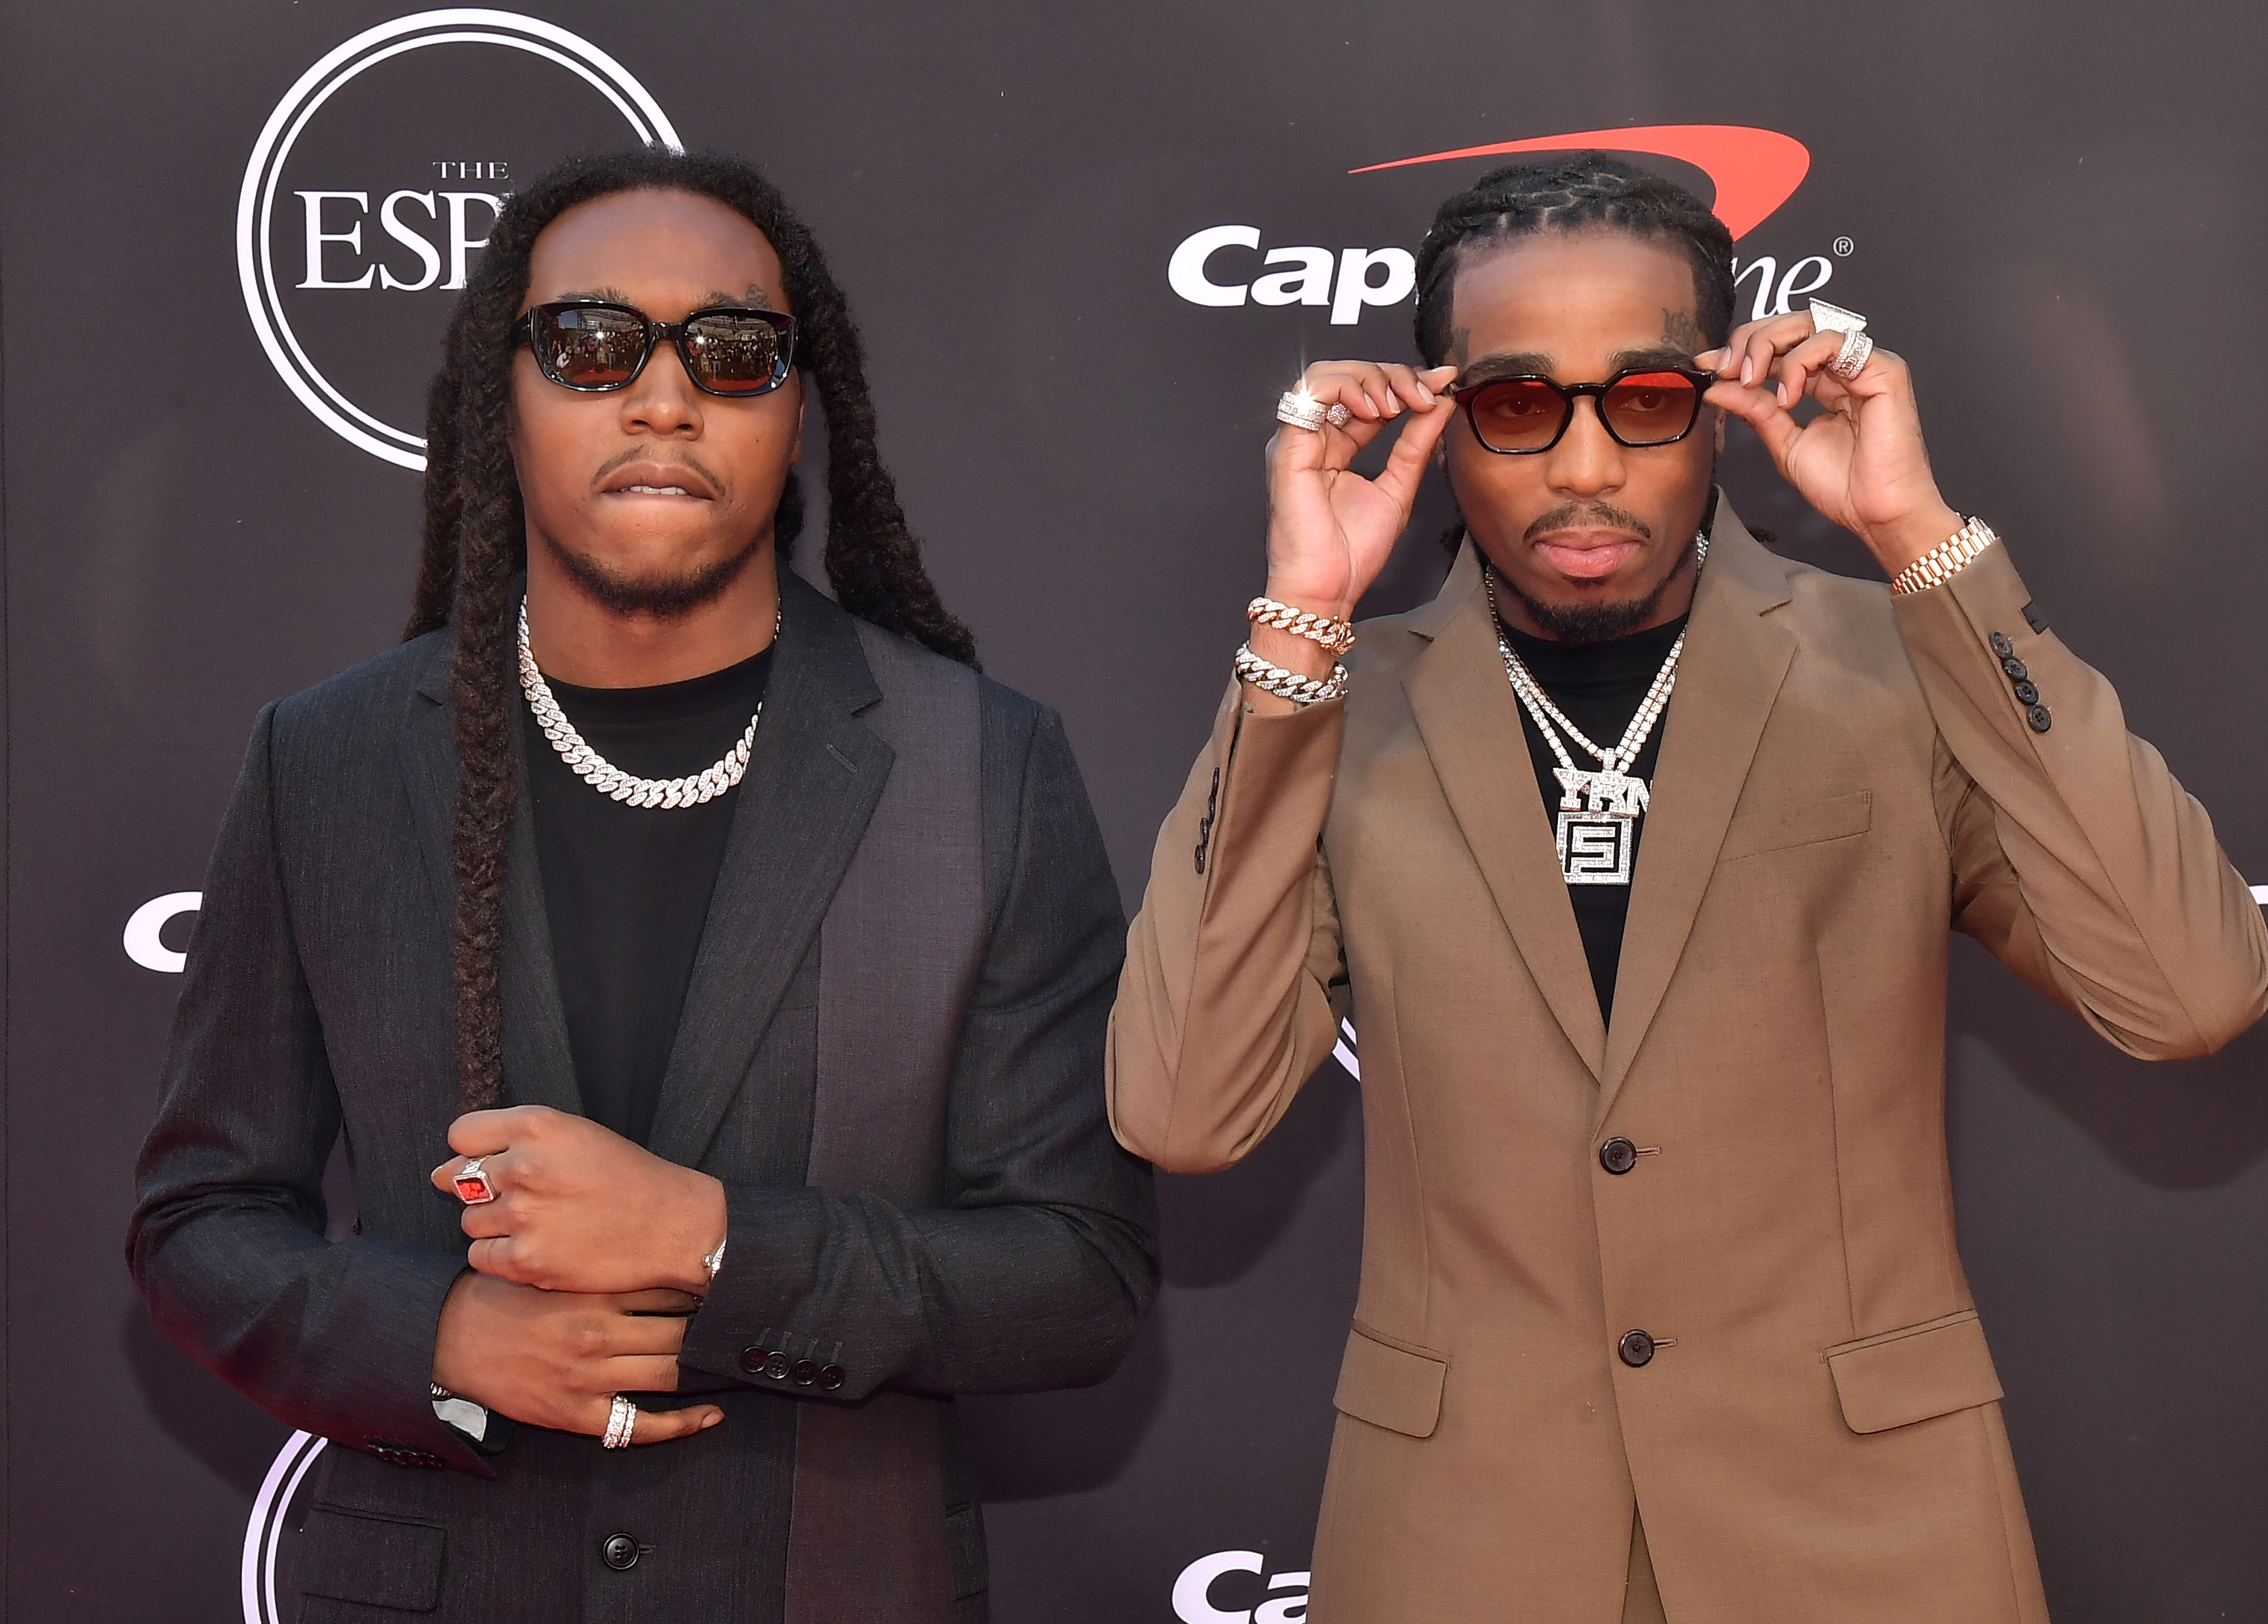 Quavo & Takeoff Announce New Album “Only Built For Infinity Links”